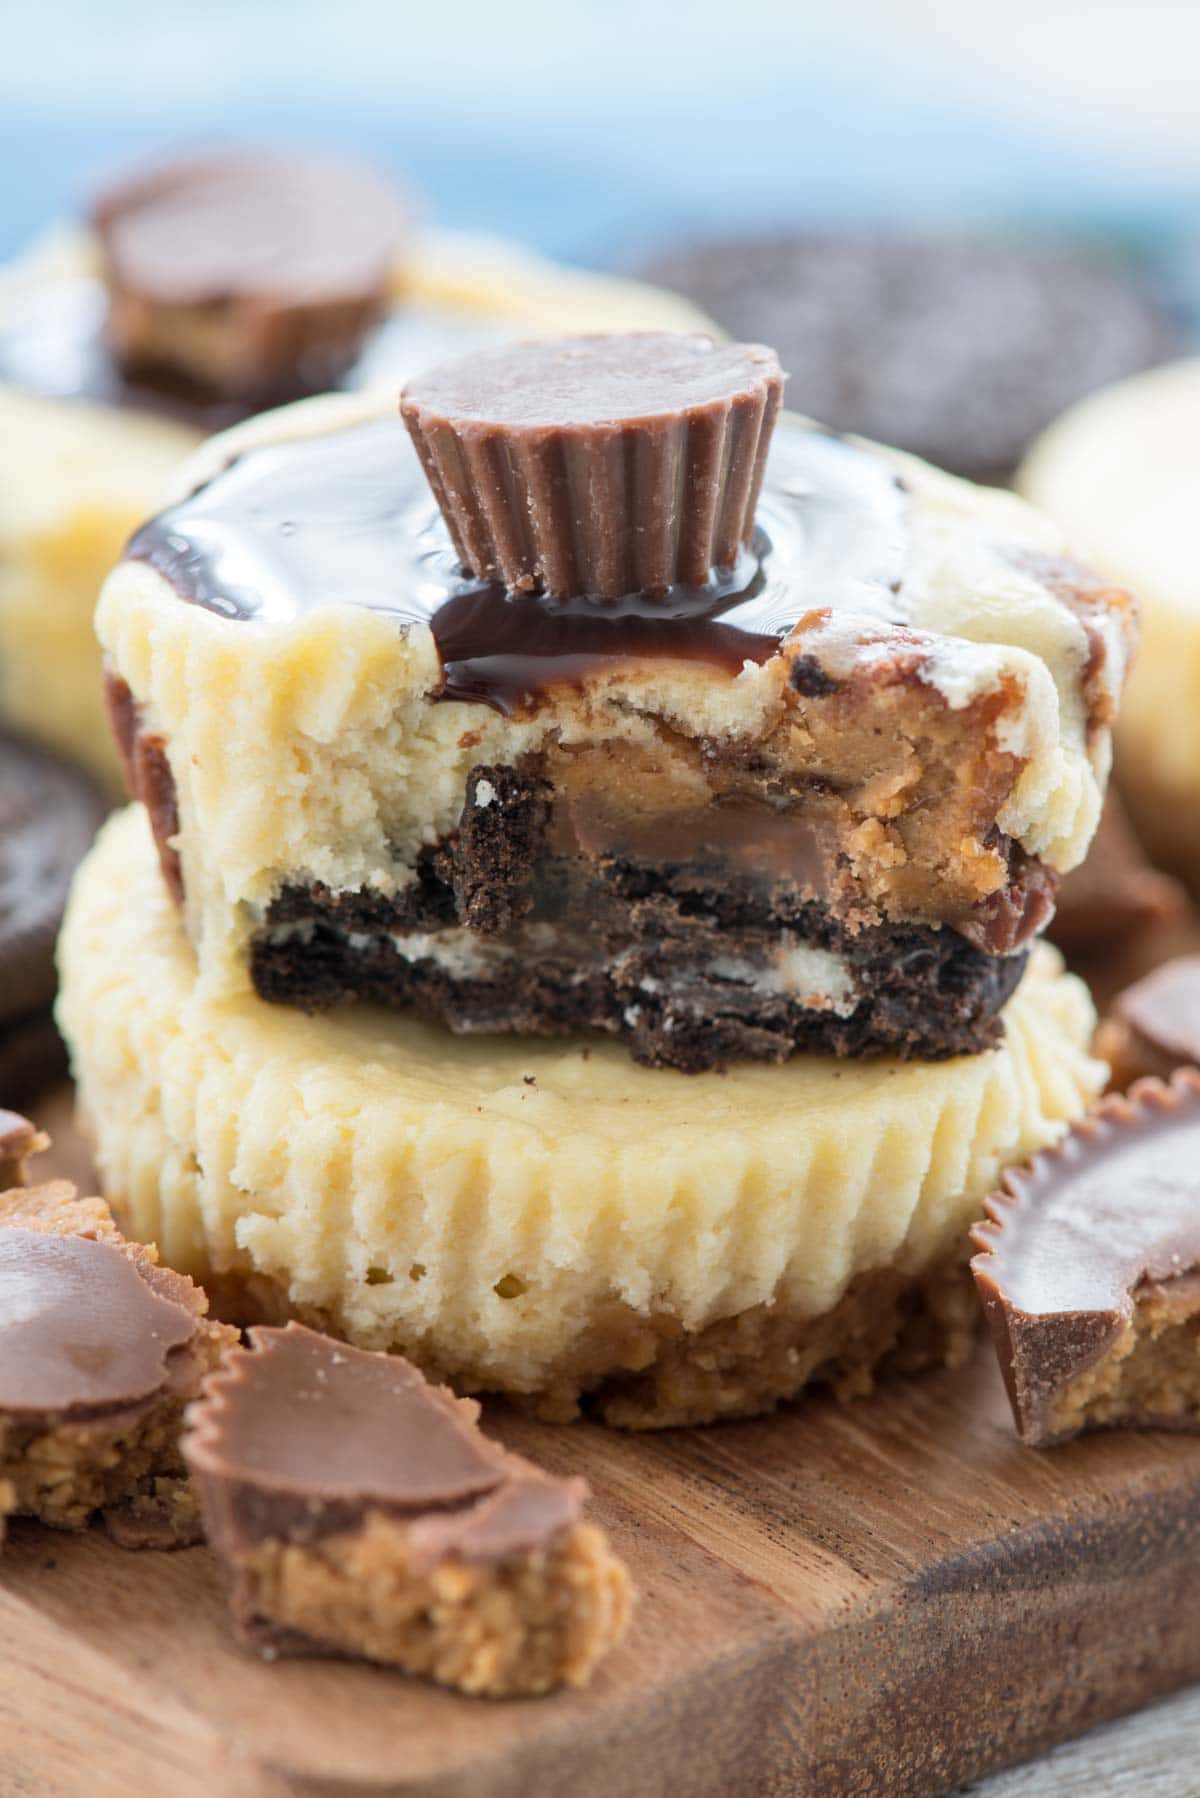 Reese's Peanut Butter Cup Cheesecake - this easy cheesecake recipe makes 12 mini peanut butter cup cheesecakes with an Oreo crust!